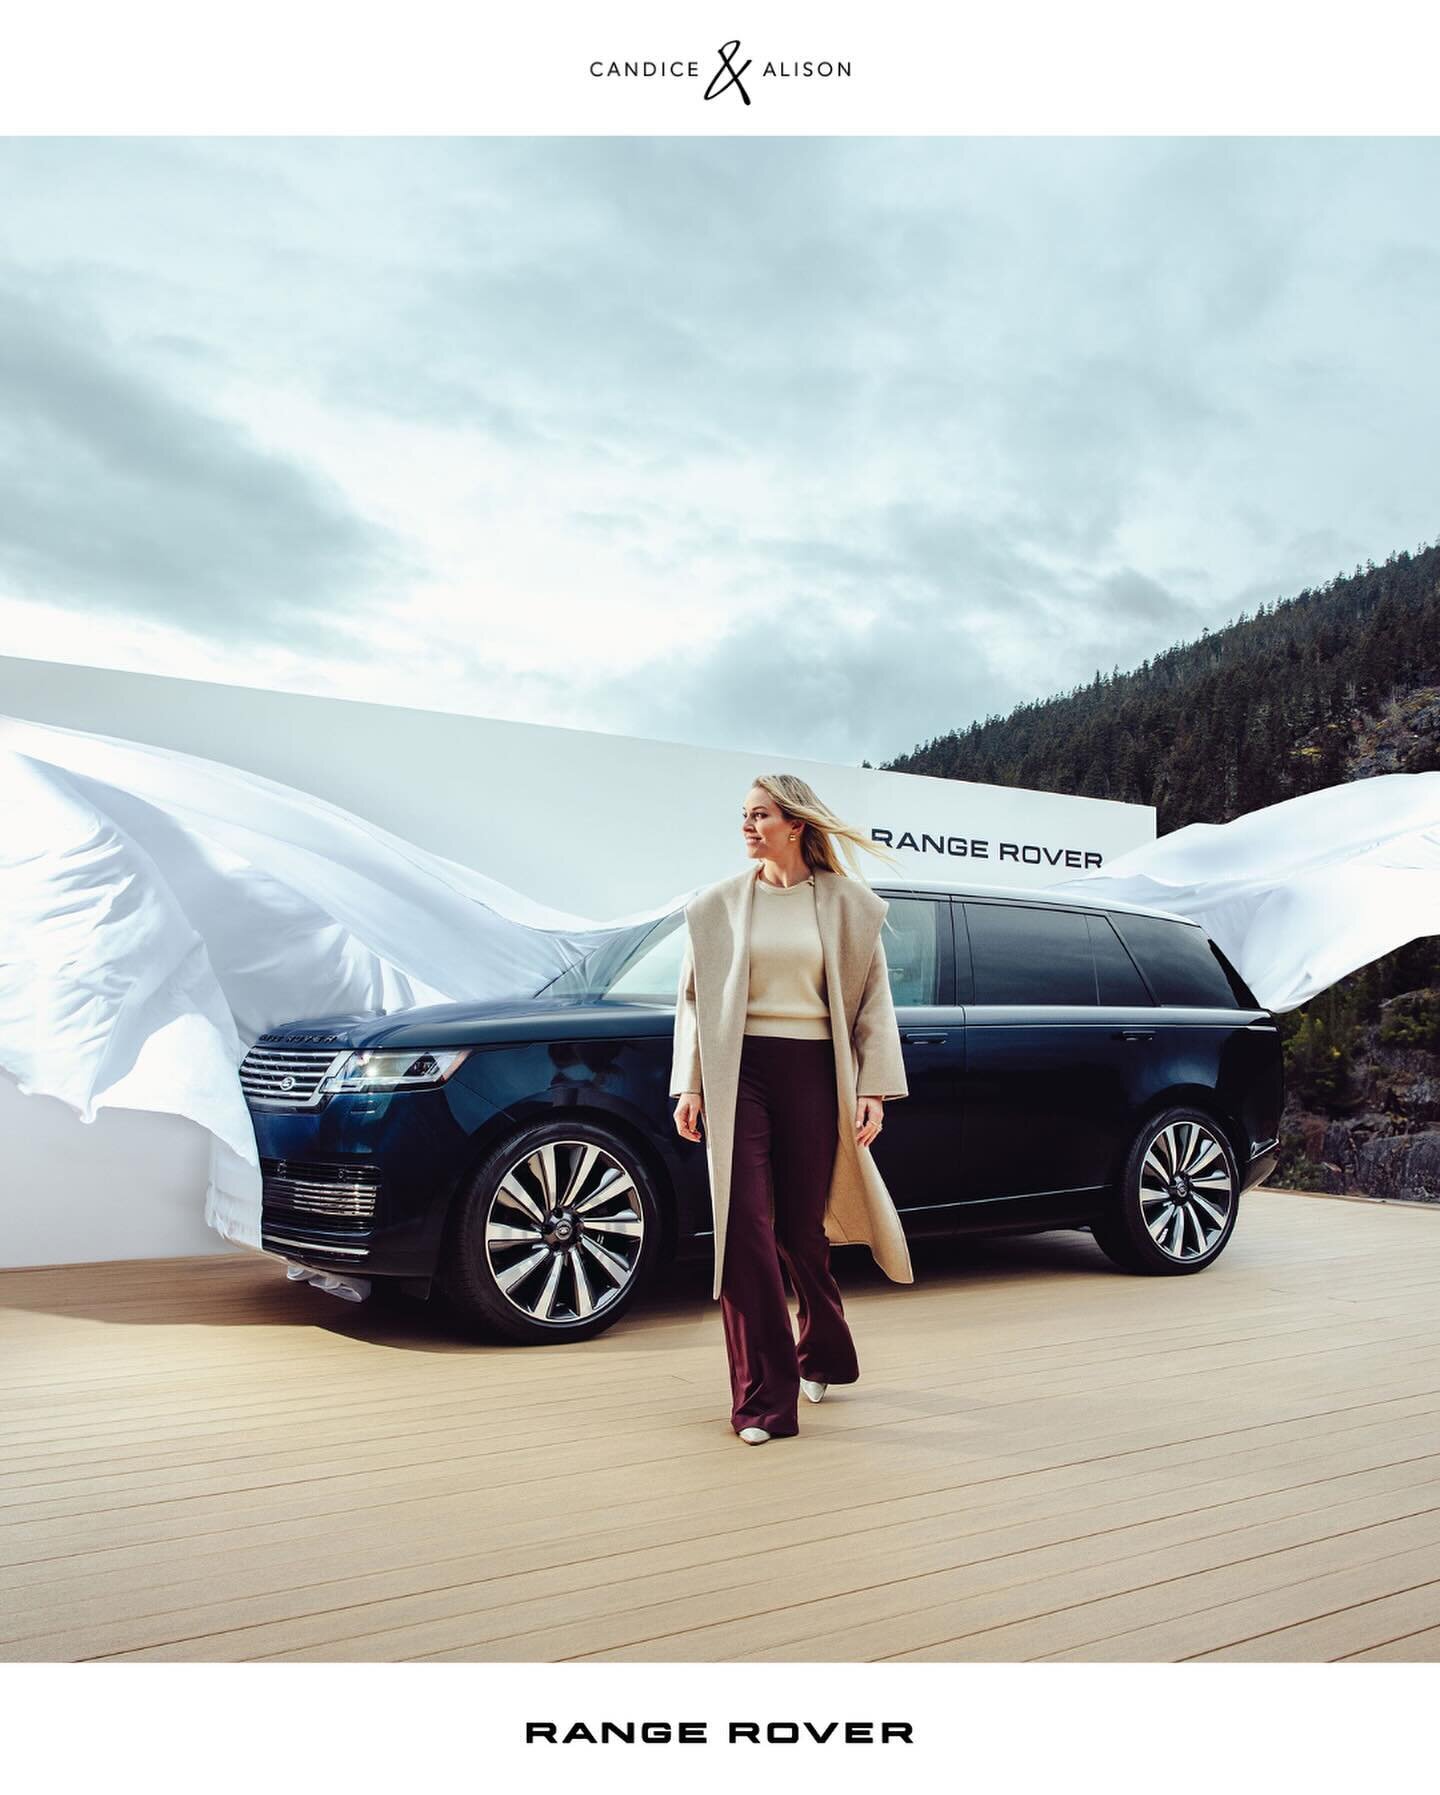 Your Exclusive Look into the Range Rover House Whistler, in collaboration with @SharpMagazine

Over the 7-day event in the mountains, VIP guests enjoyed wine tastings, drive experiences with the new luxury Range Rover Arete edition, various high-end 